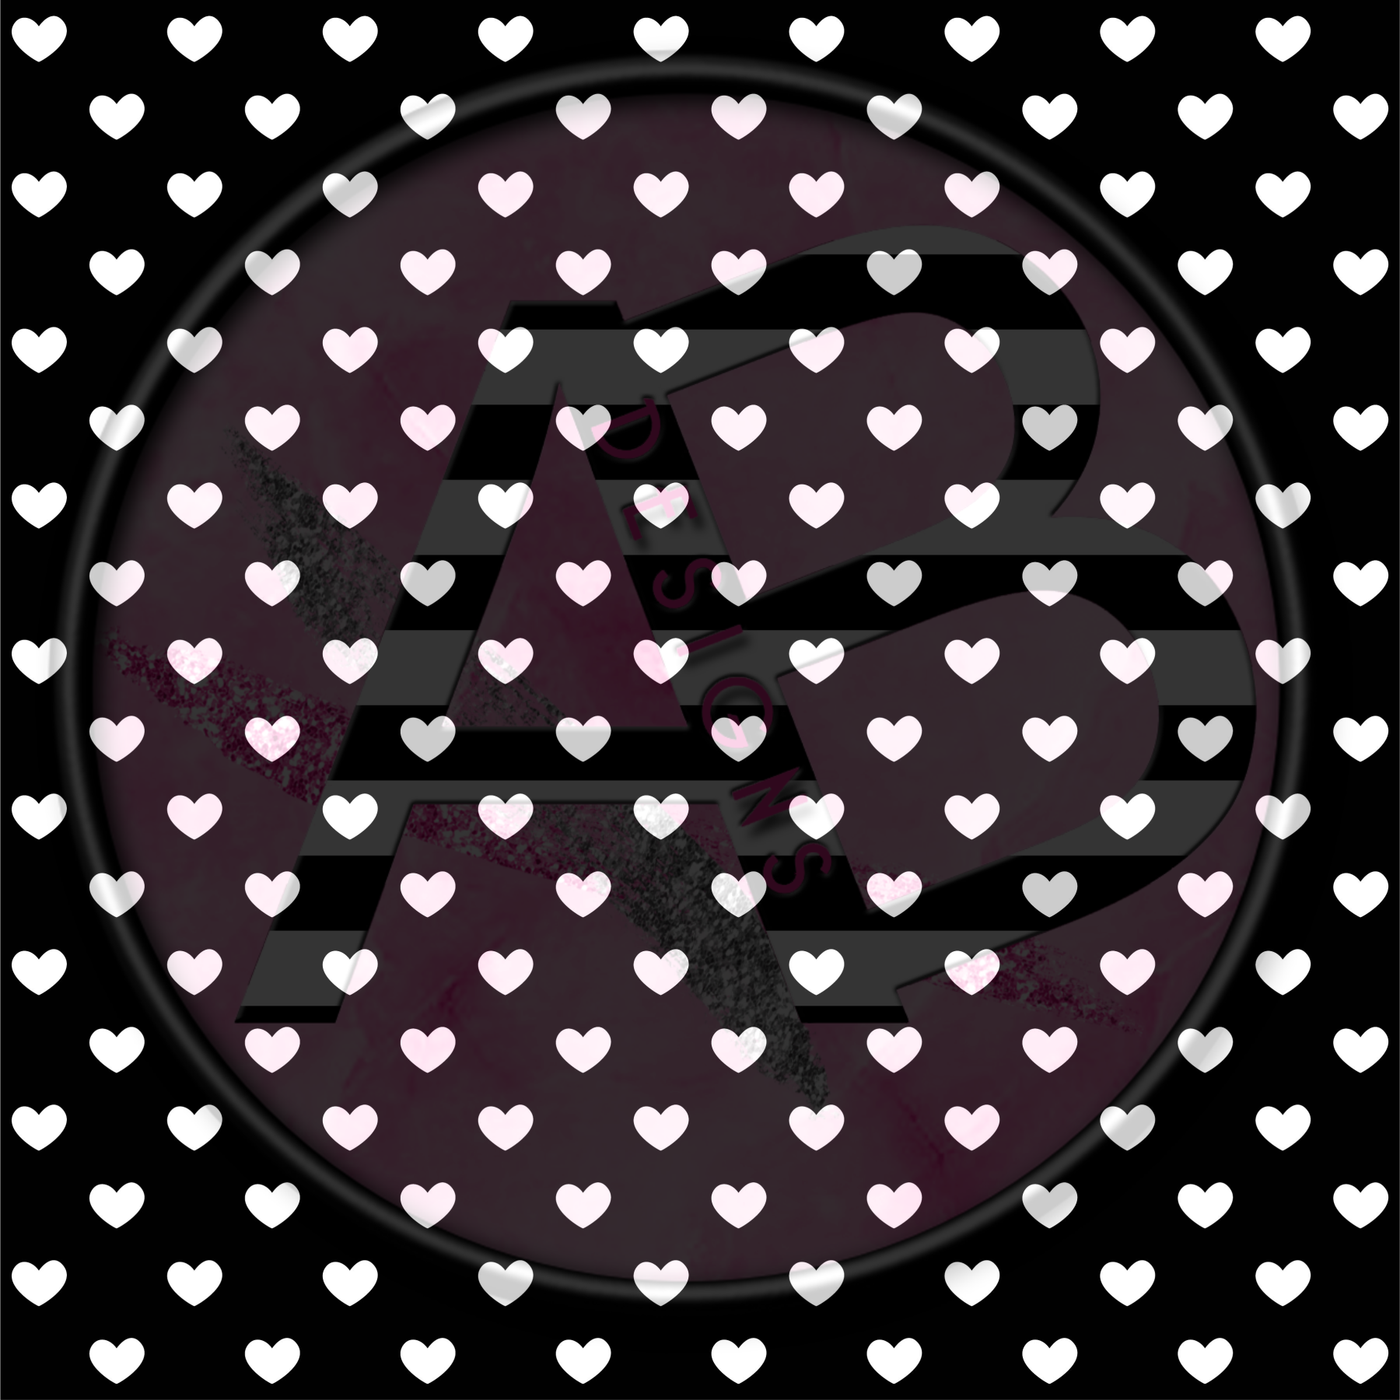 Adhesive Patterned Vinyl - Hearts 22